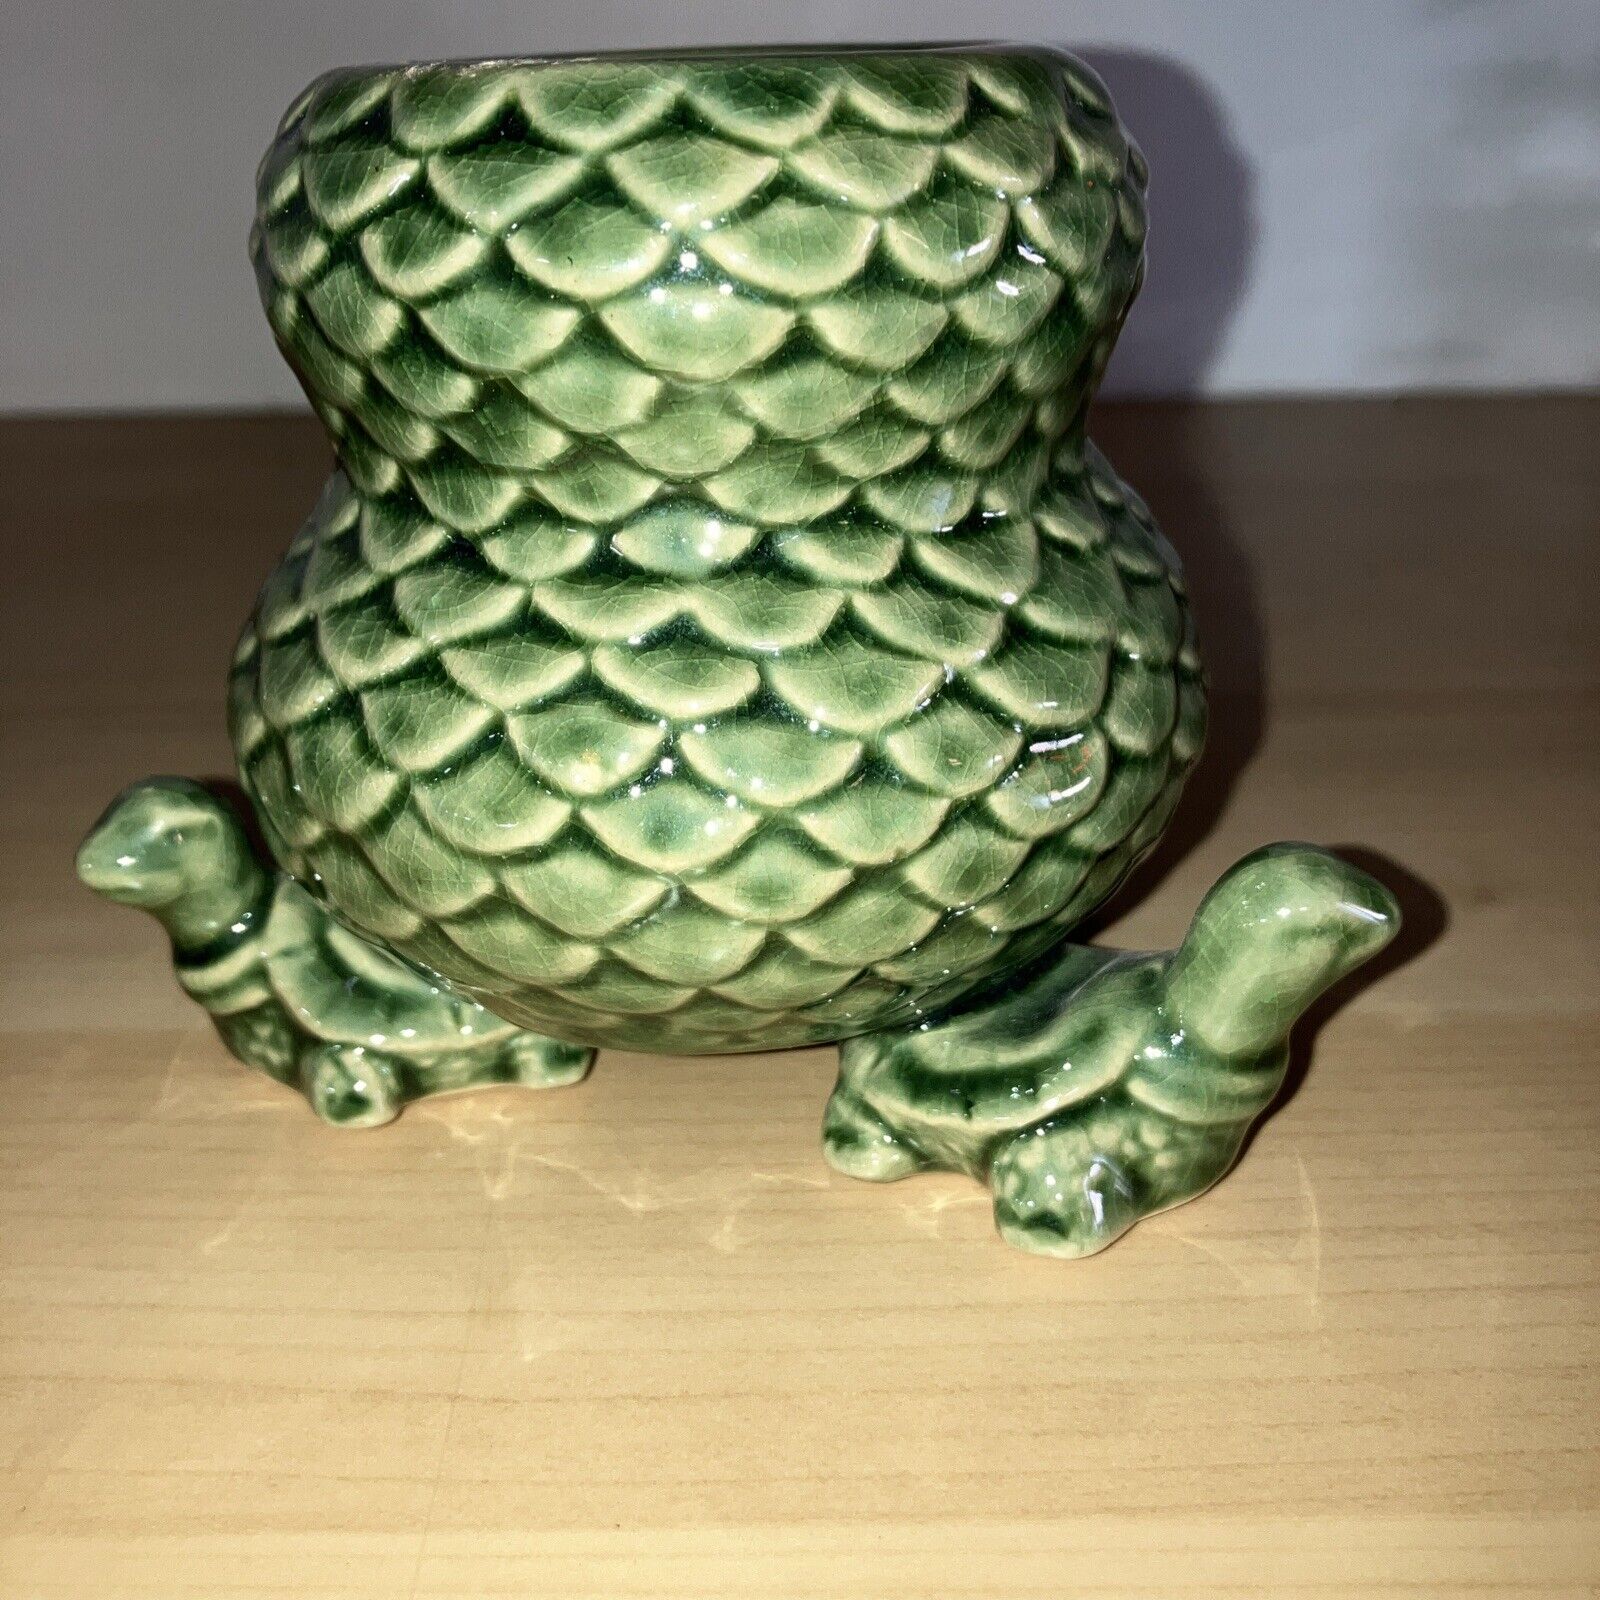 Green Porcelain Planter/Vase Being Carried By Three Turtles. 3.5 In Tall by 4in